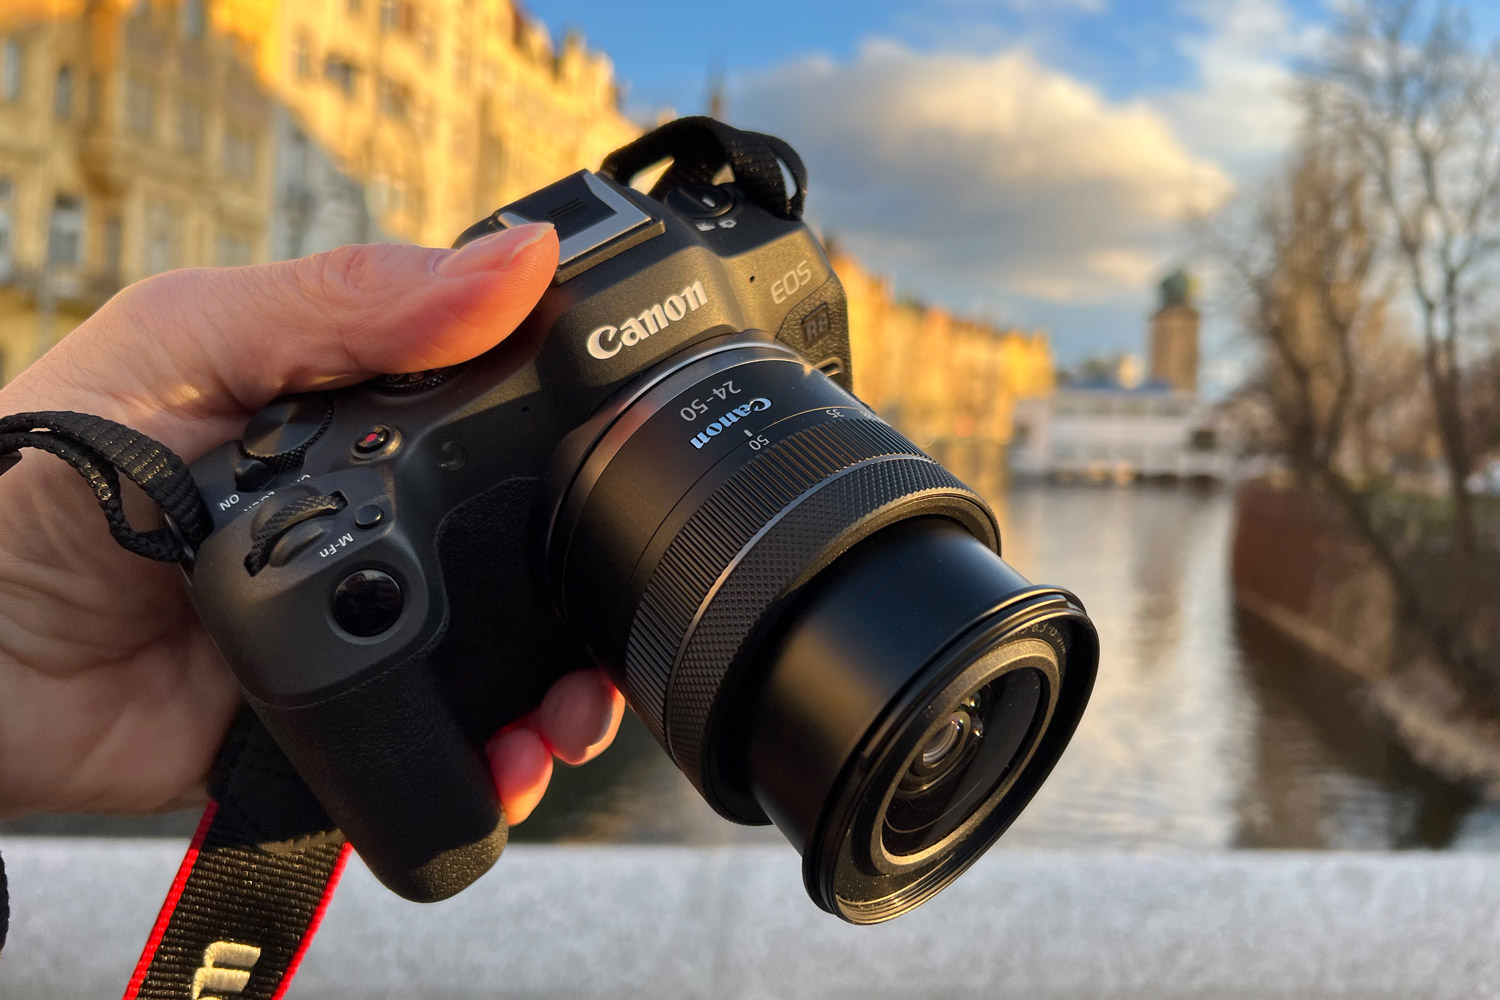 Canon EOS R8 Review: Budget Full Frame Power With Compromises